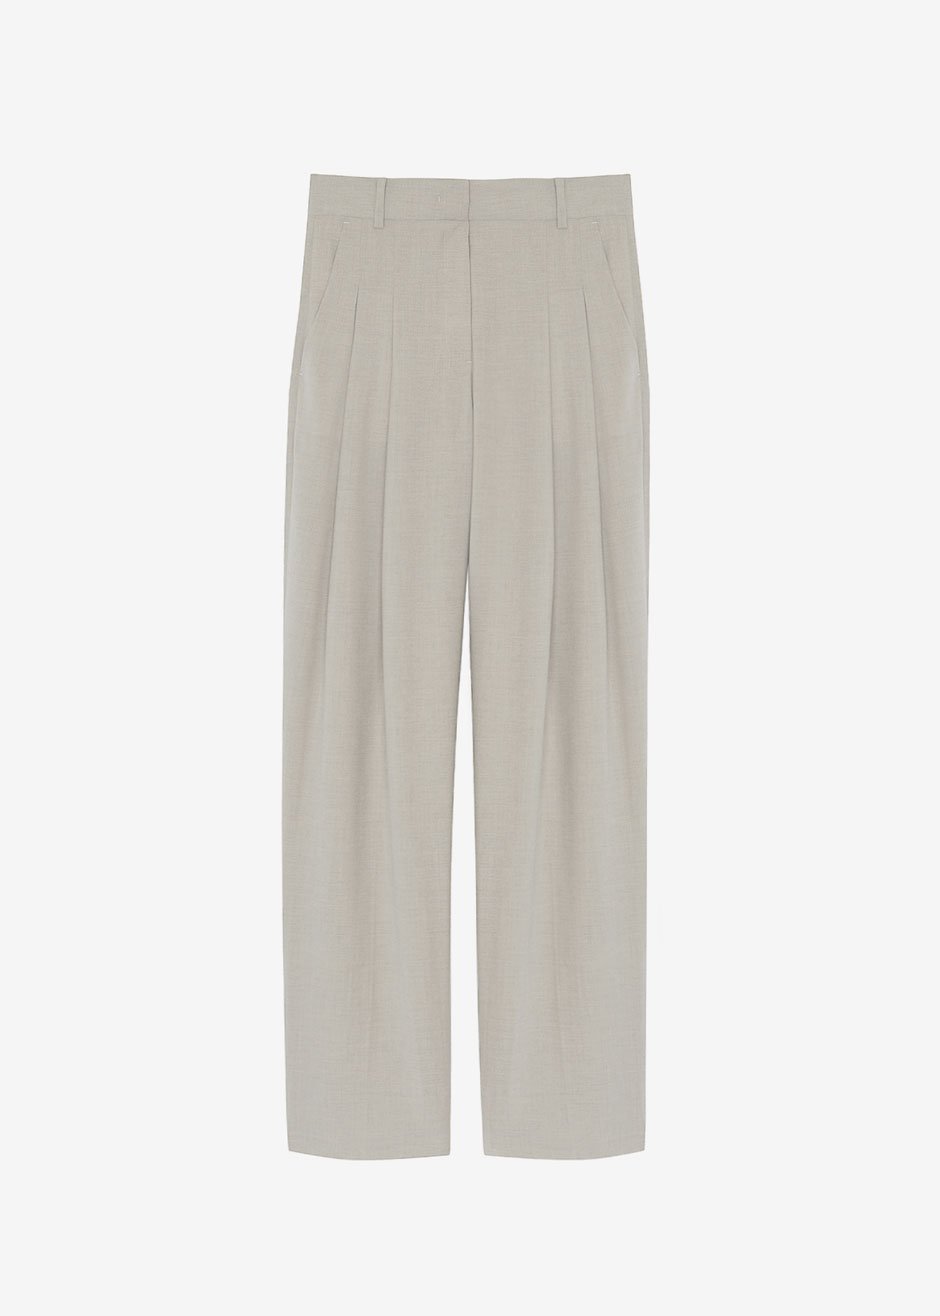 Gelso Pleated Trousers - Light Taupe Melange - 31